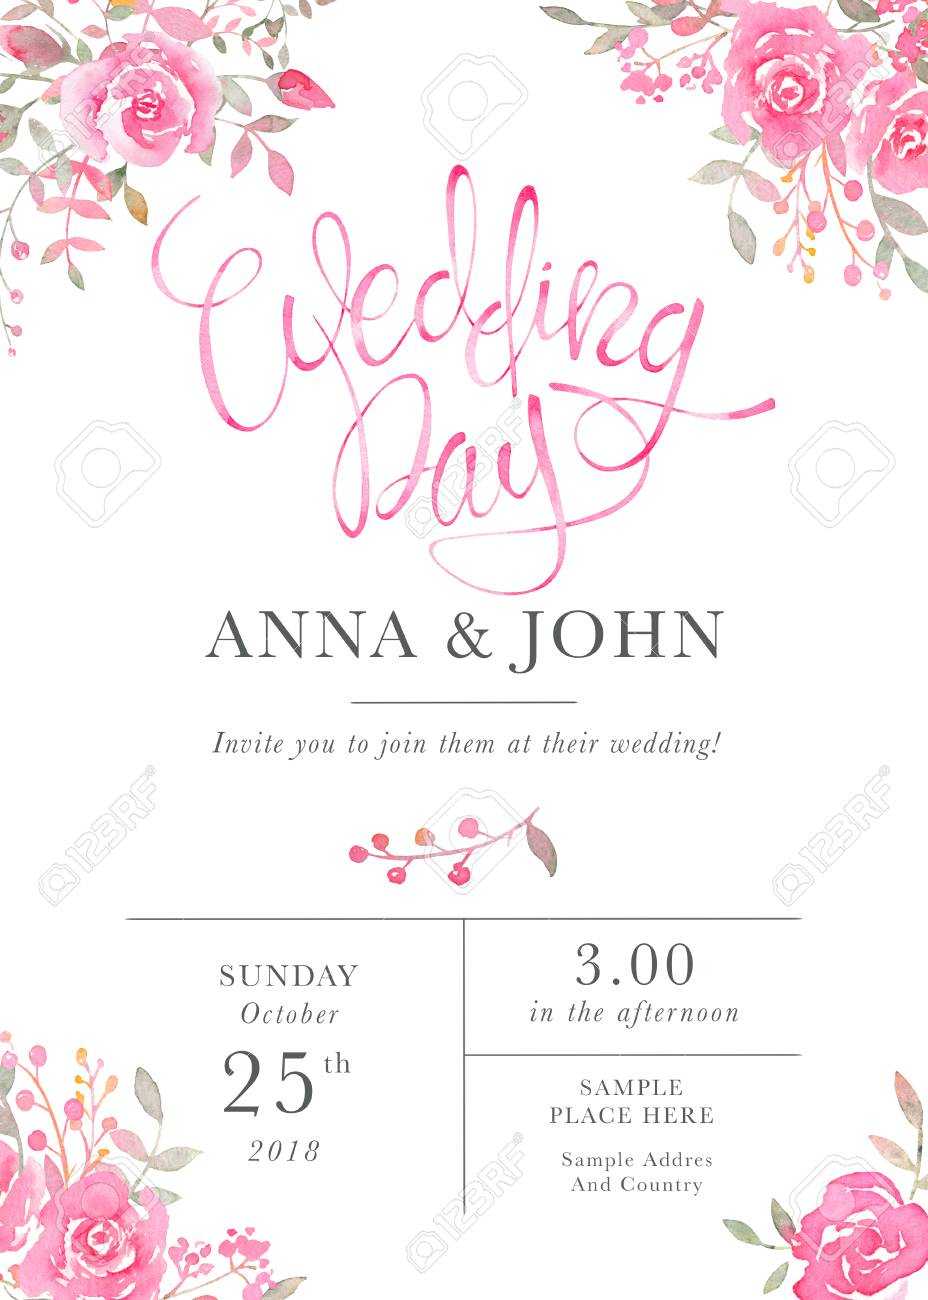 Wedding Invitation Card Template With Watercolor Rose Flowers In Free E Wedding Invitation Card Templates